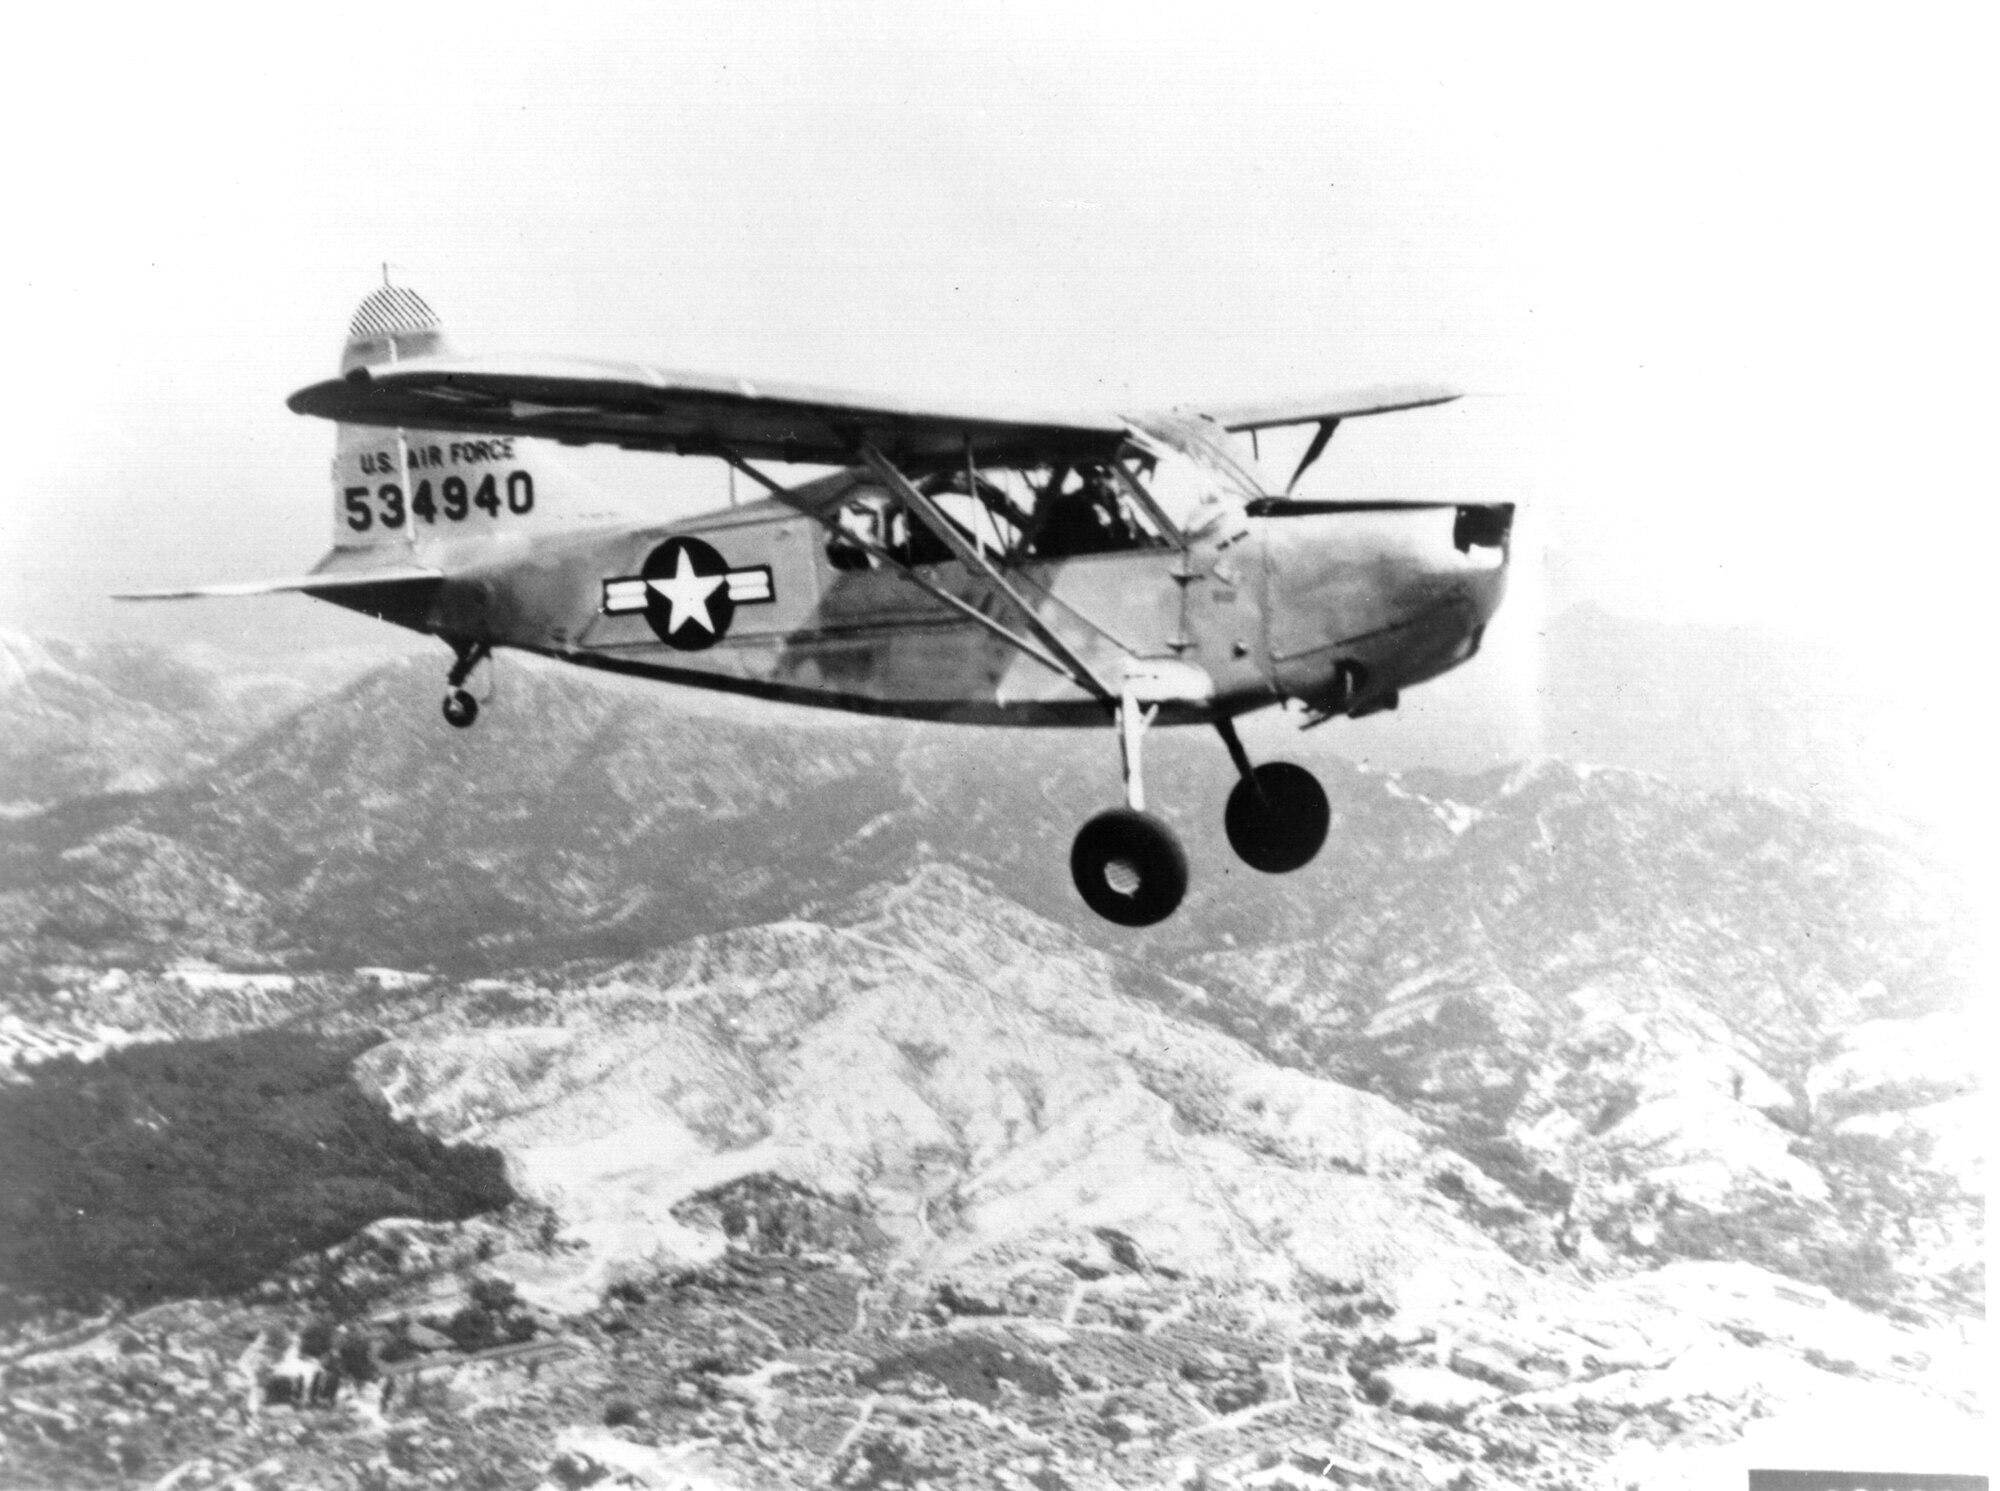 Single Vultee USAF L-5 shown in flight. This aircraft is powered by an O-series engine. (Photo courtesy of the Tinker History Office)